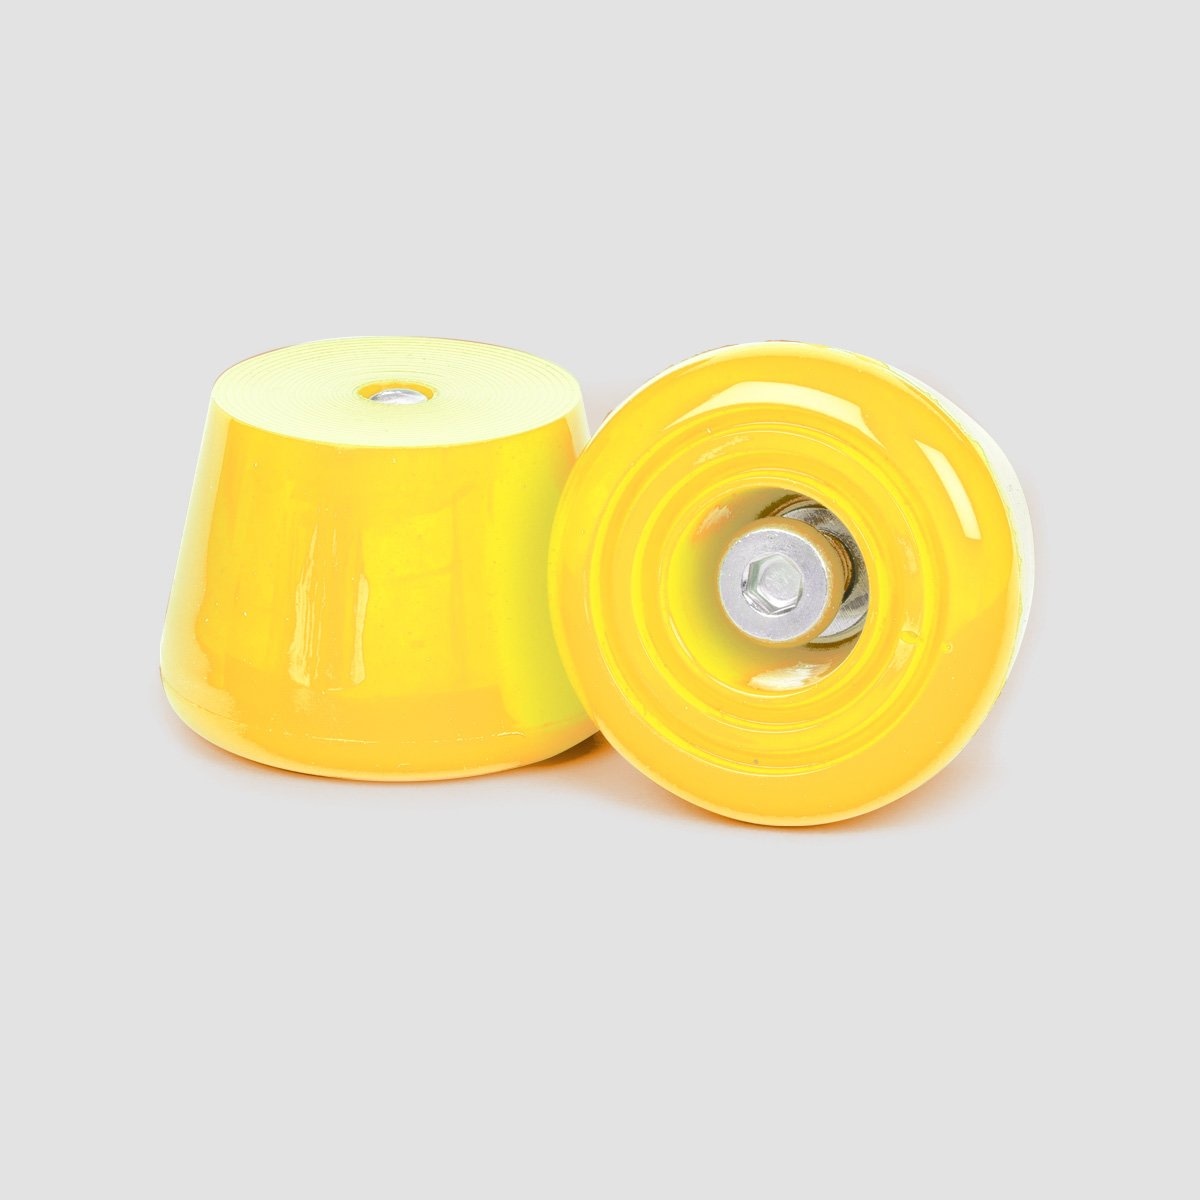 Rio Roller Toe Stoppers x2 Yellow - Skates